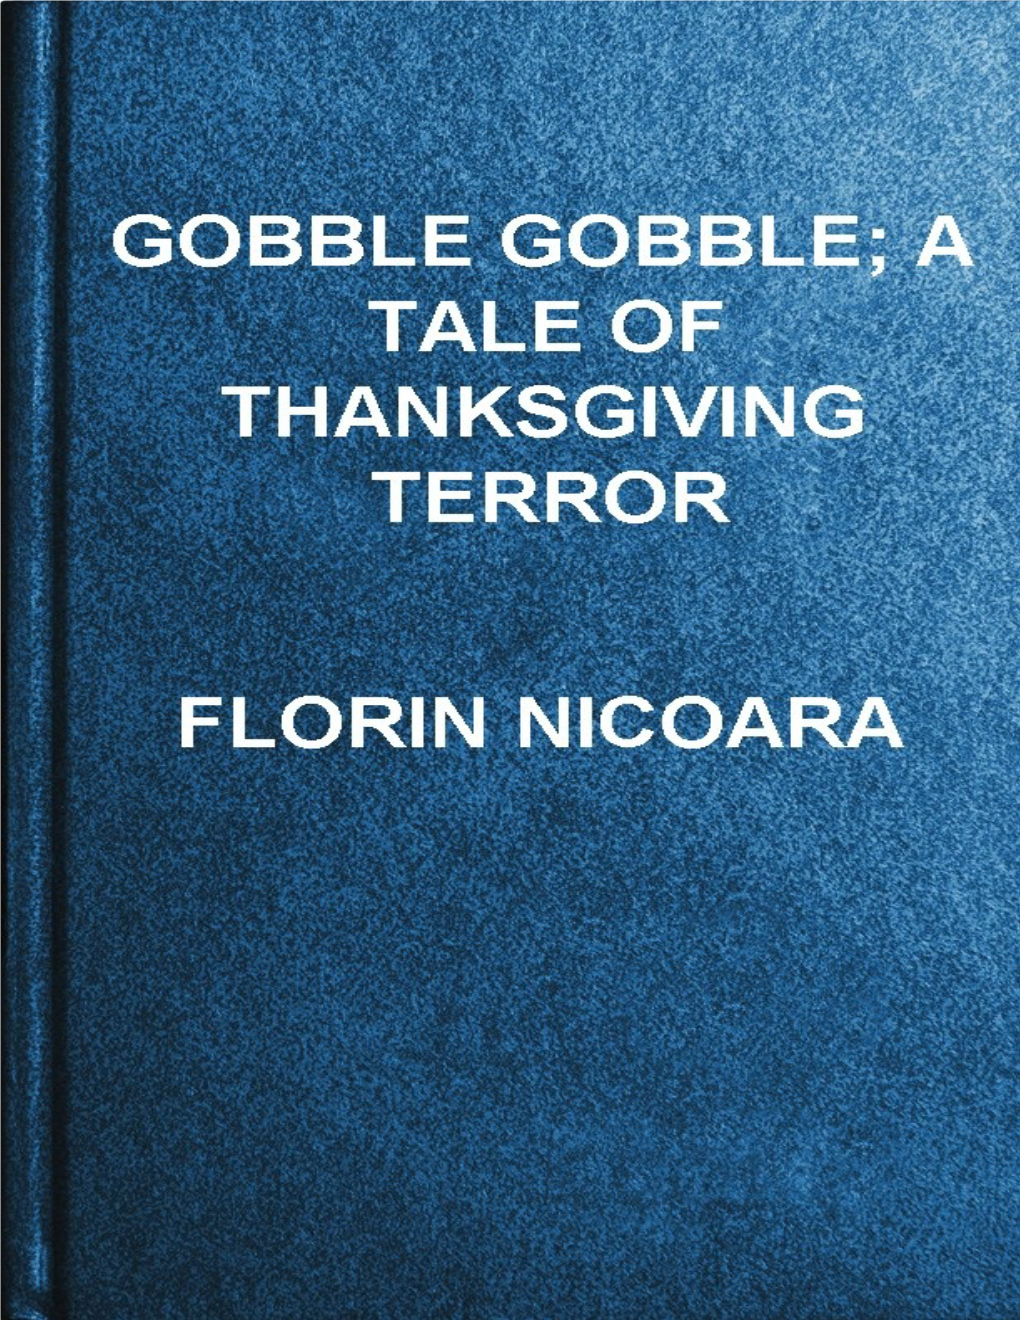 A Tale of Thanksgiving Terror!